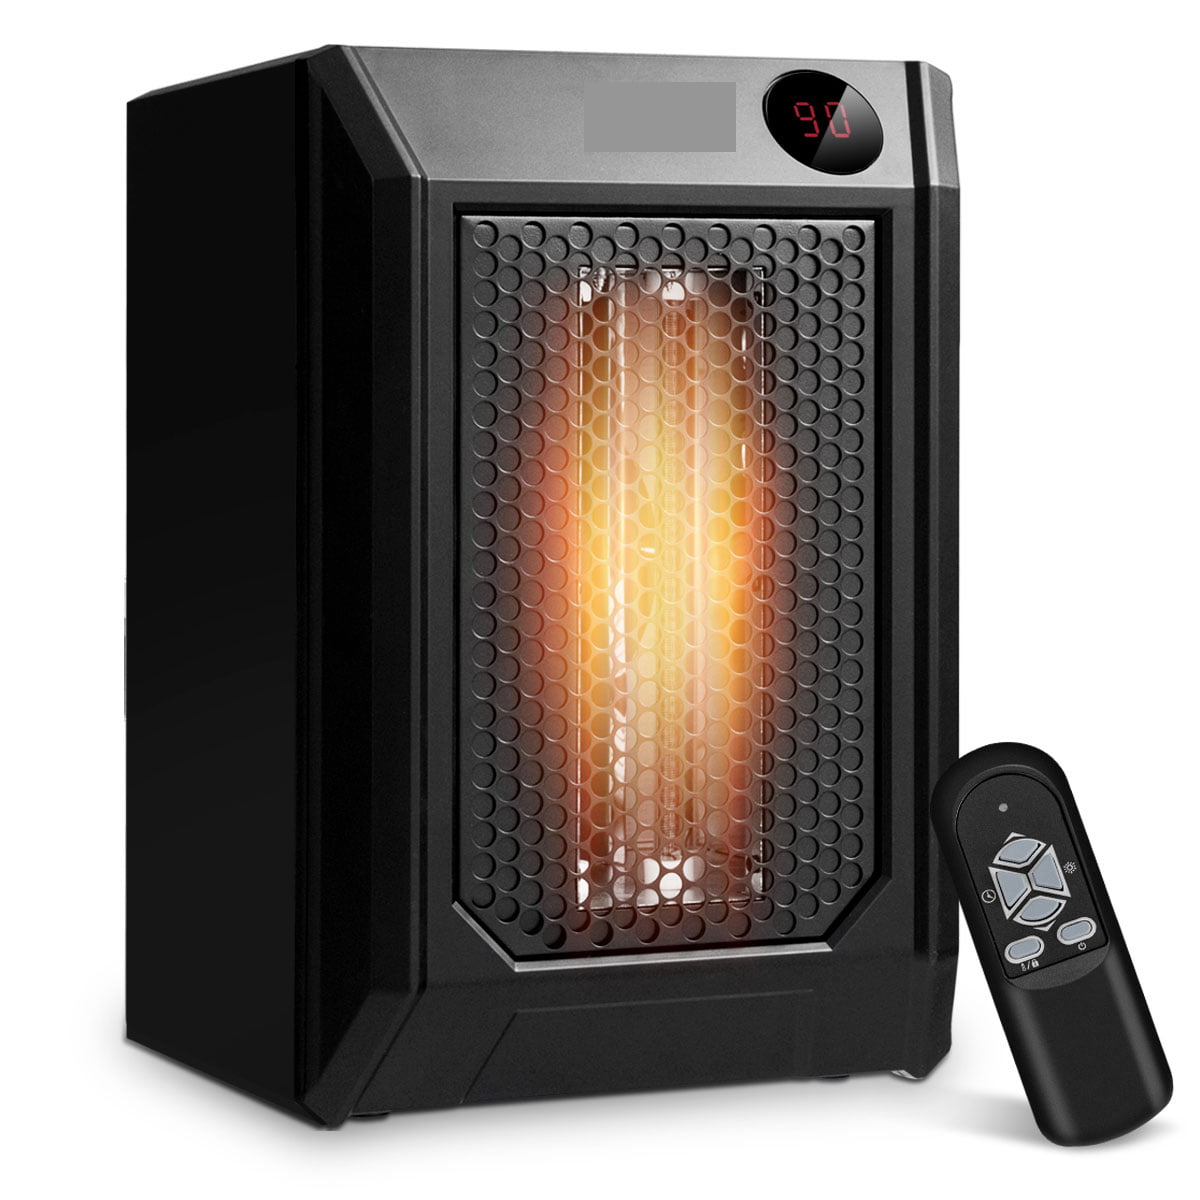 1500w-electric-space-heater-room-heating-machine-w-led-display-timer